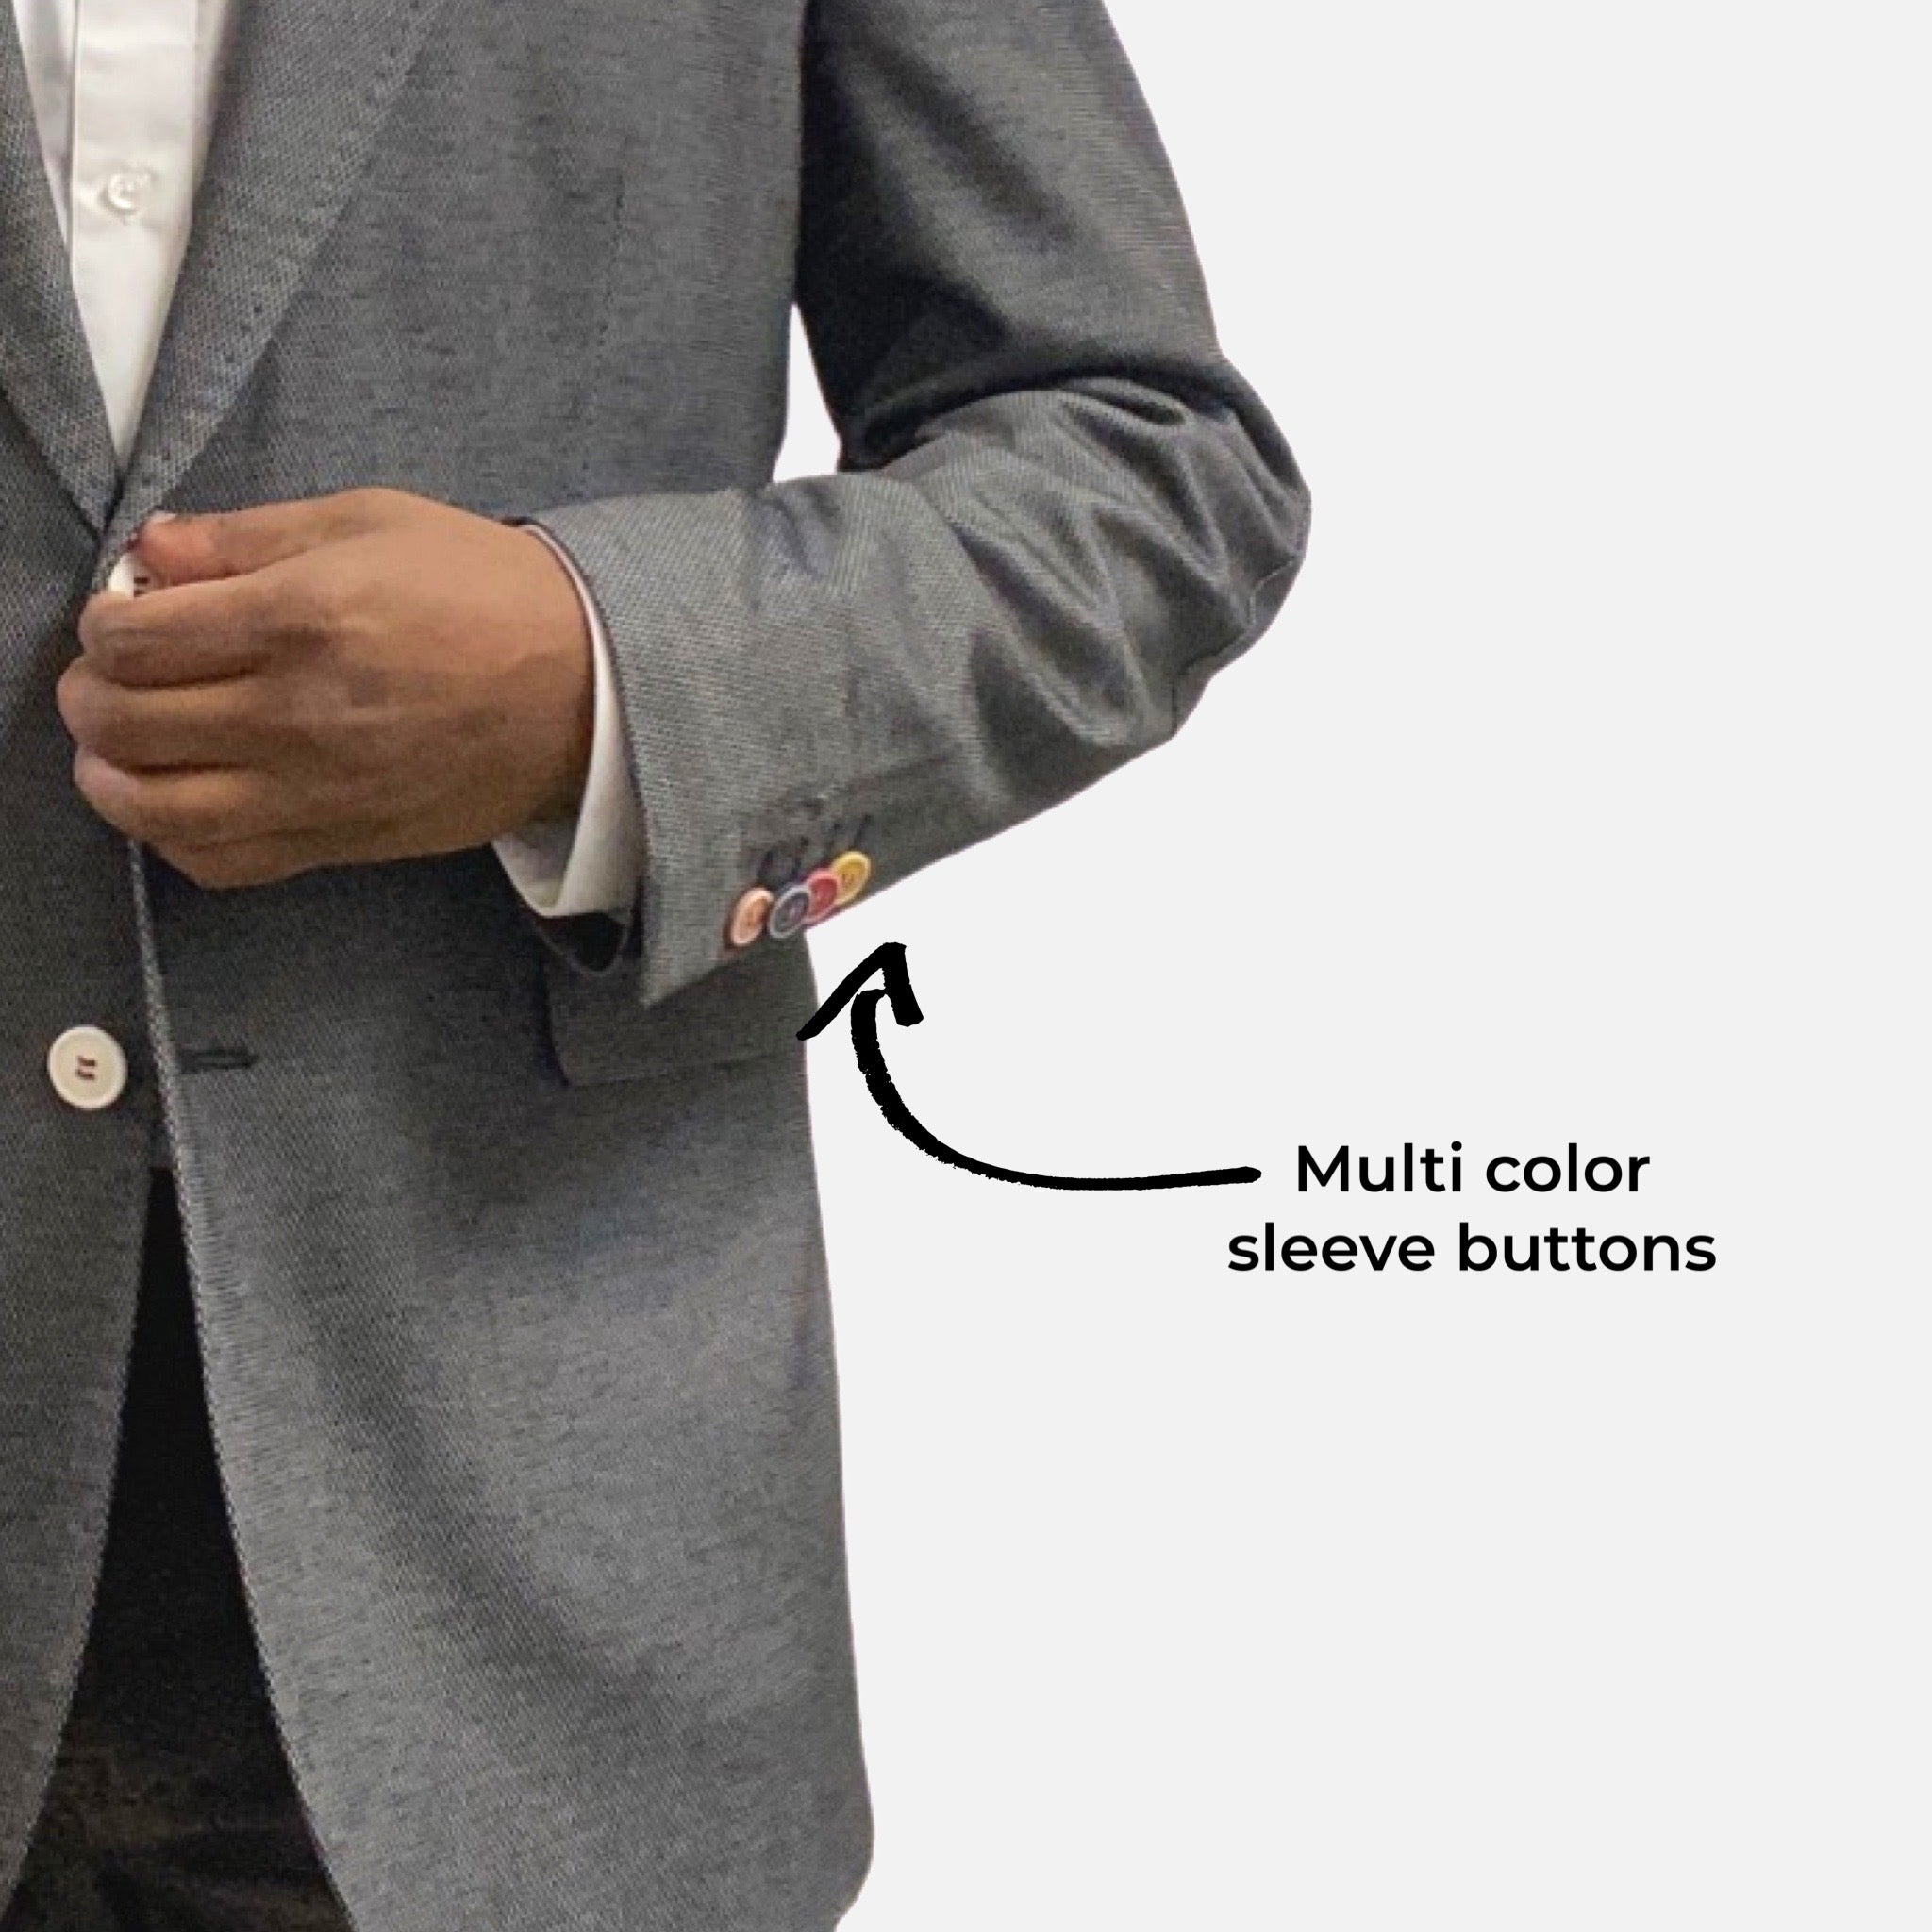 Multi color buttons on sleeve of blazer